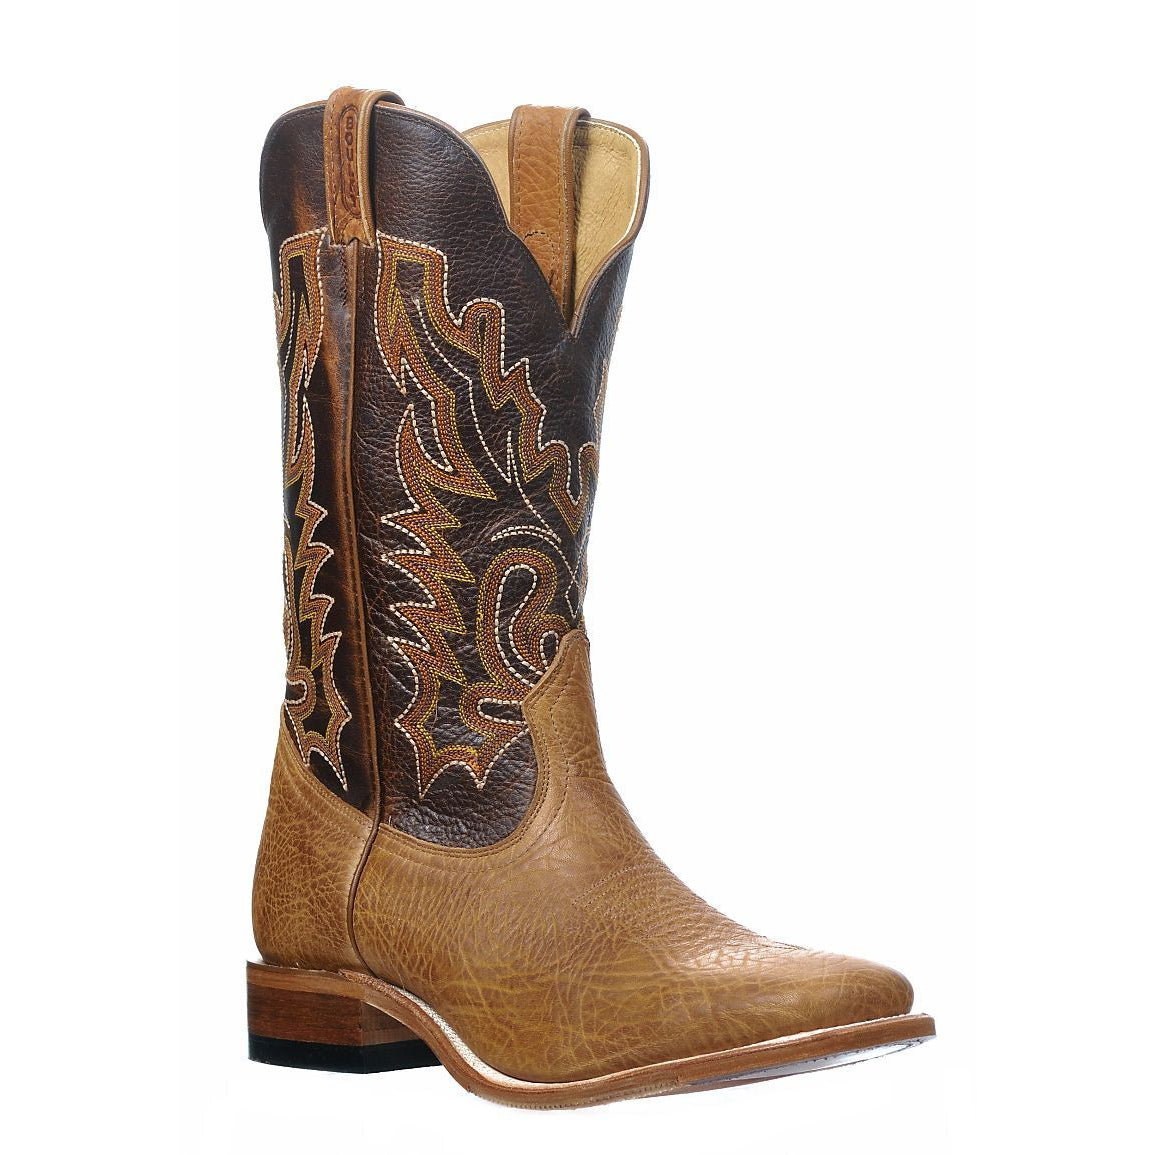 Boulet Men's Wide Square Toe Western Boots - Shoulder Old Town/Damiana Moka